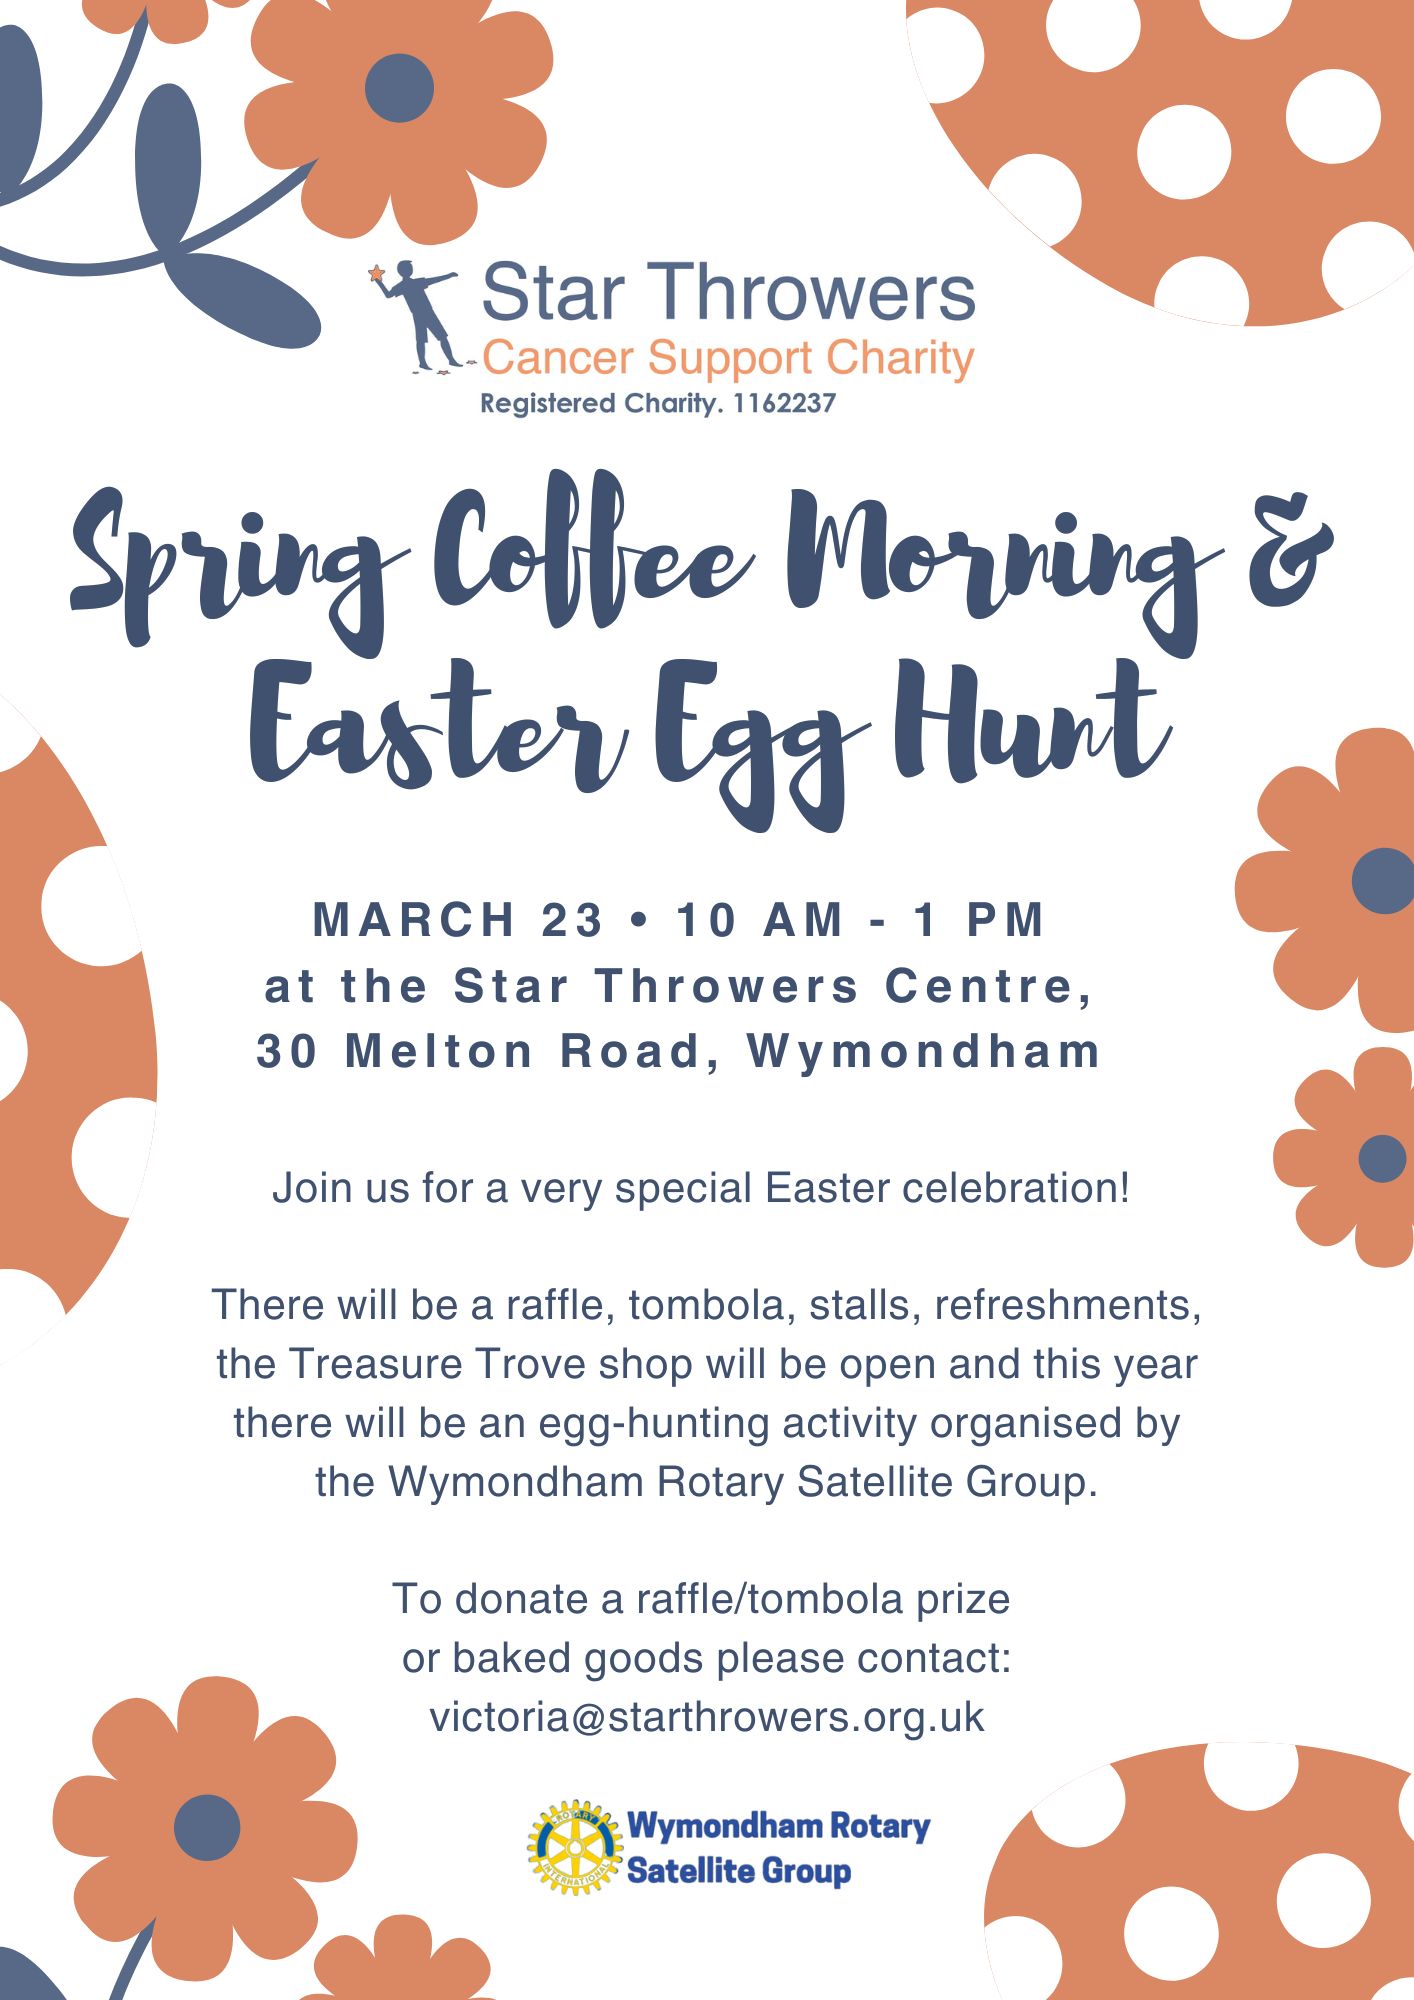 Spring Coffee Morning & Easter Egg Hunt – Star Throwers, Wymondham, 23rd March